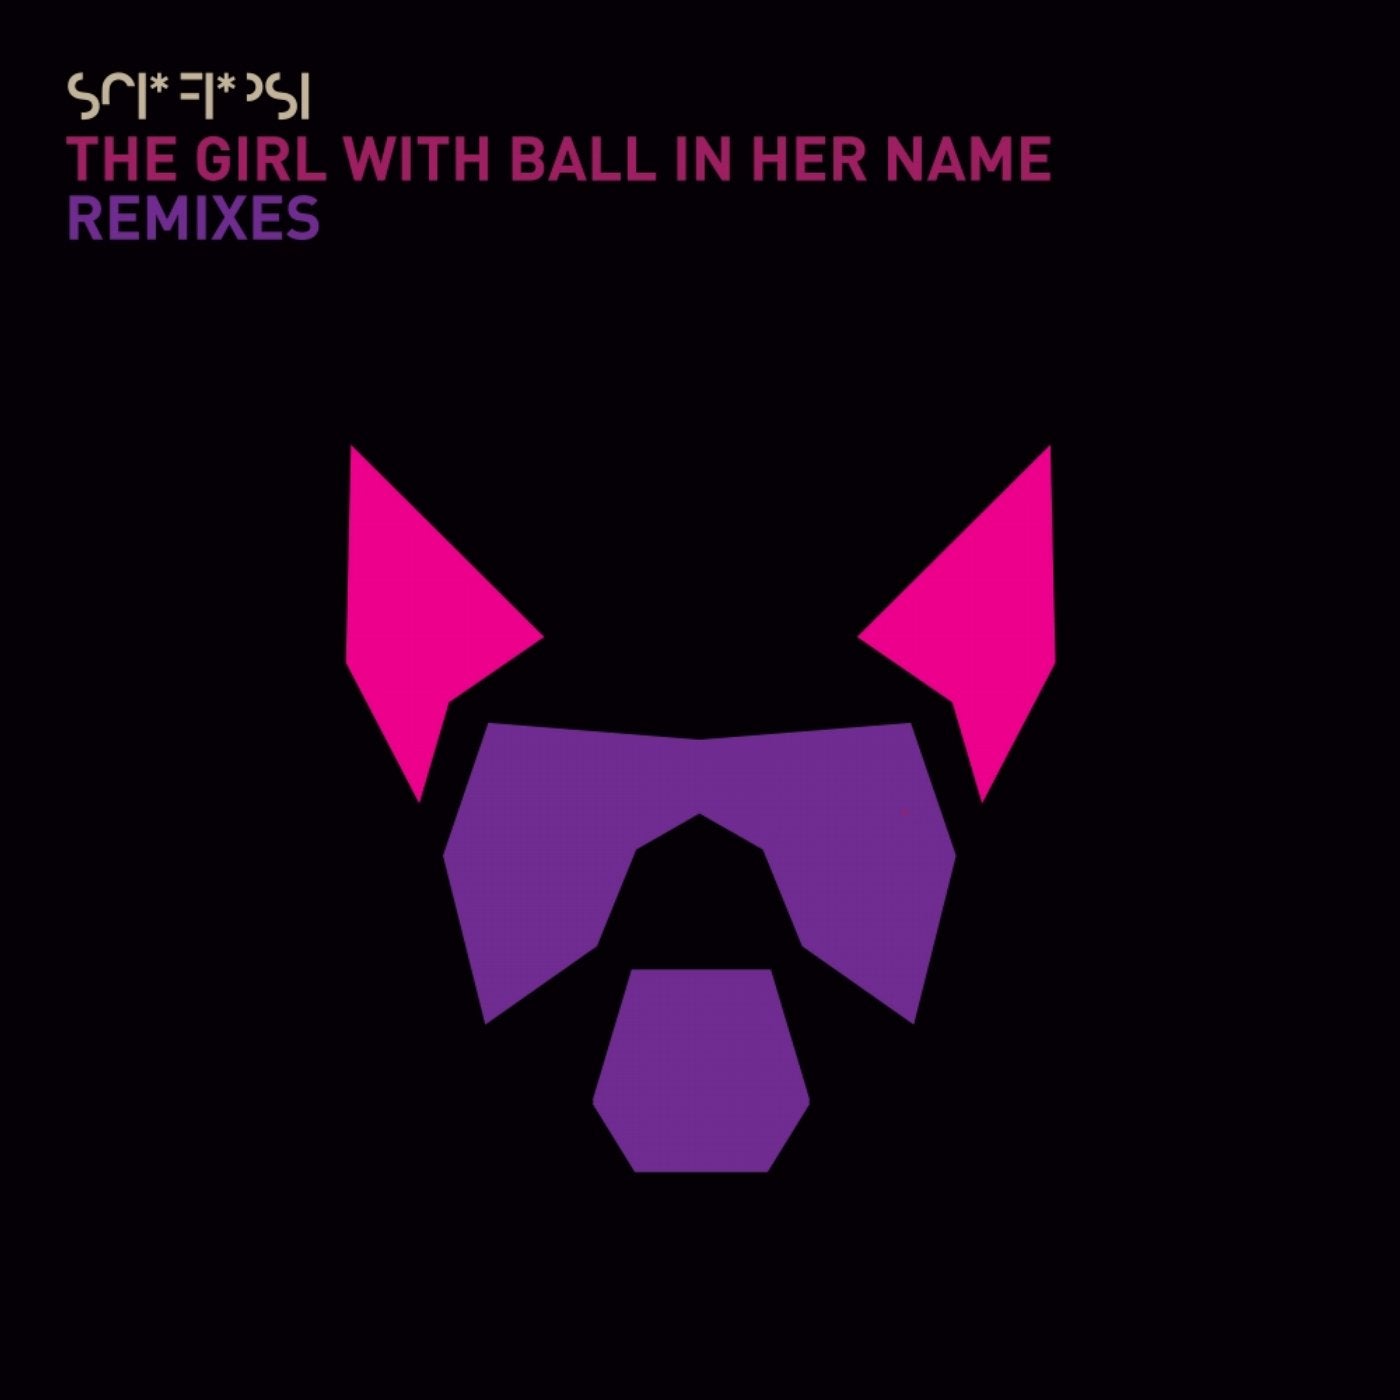 The Girl With Ball In Her Name Remixes